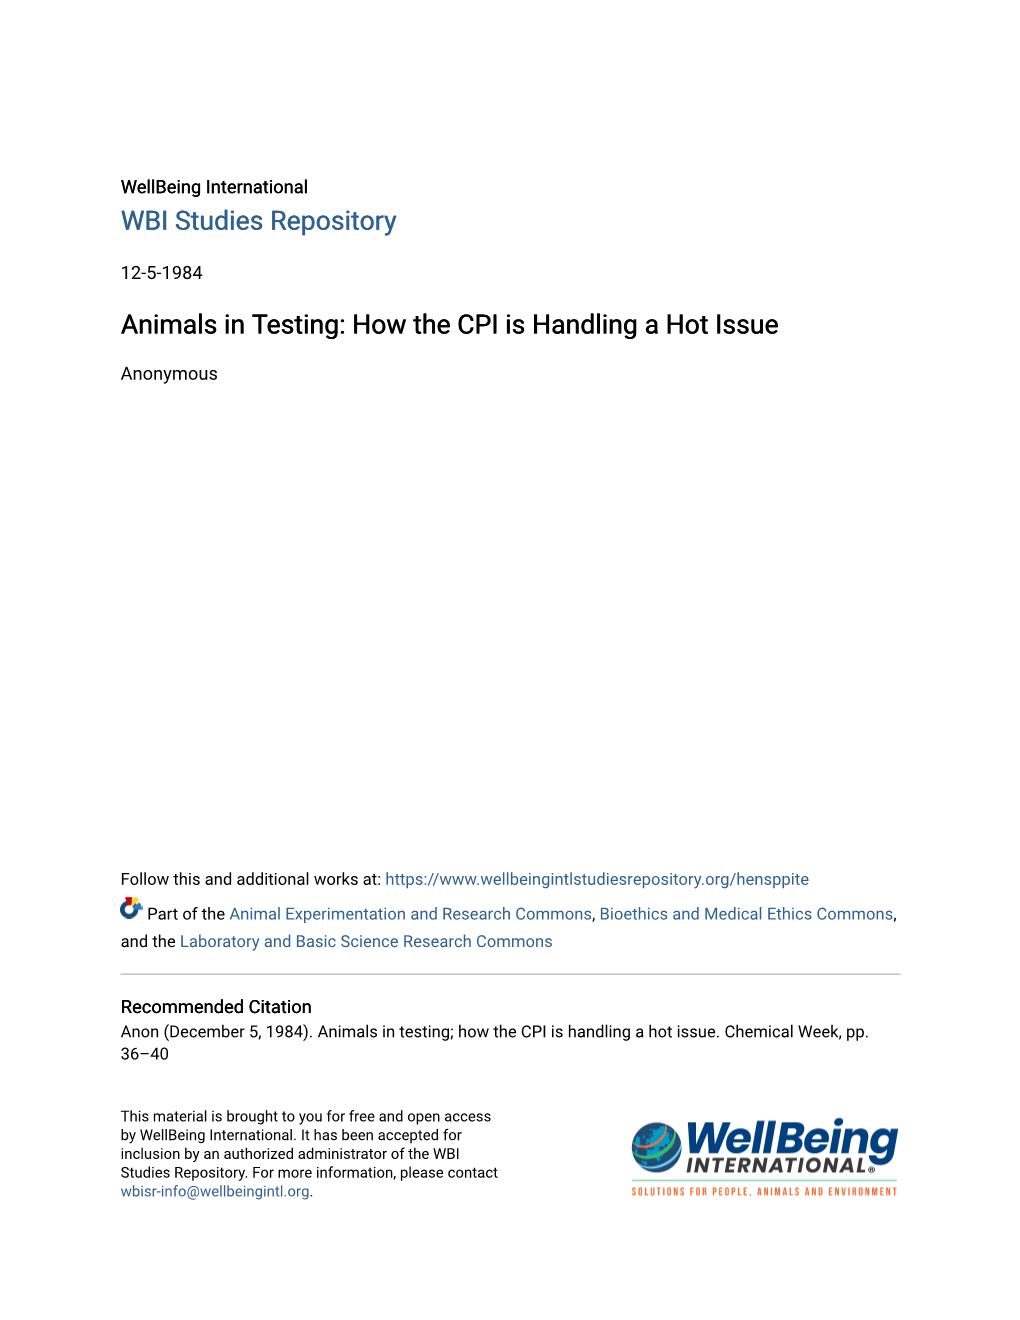 Animals in Testing: How the CPI Is Handling a Hot Issue